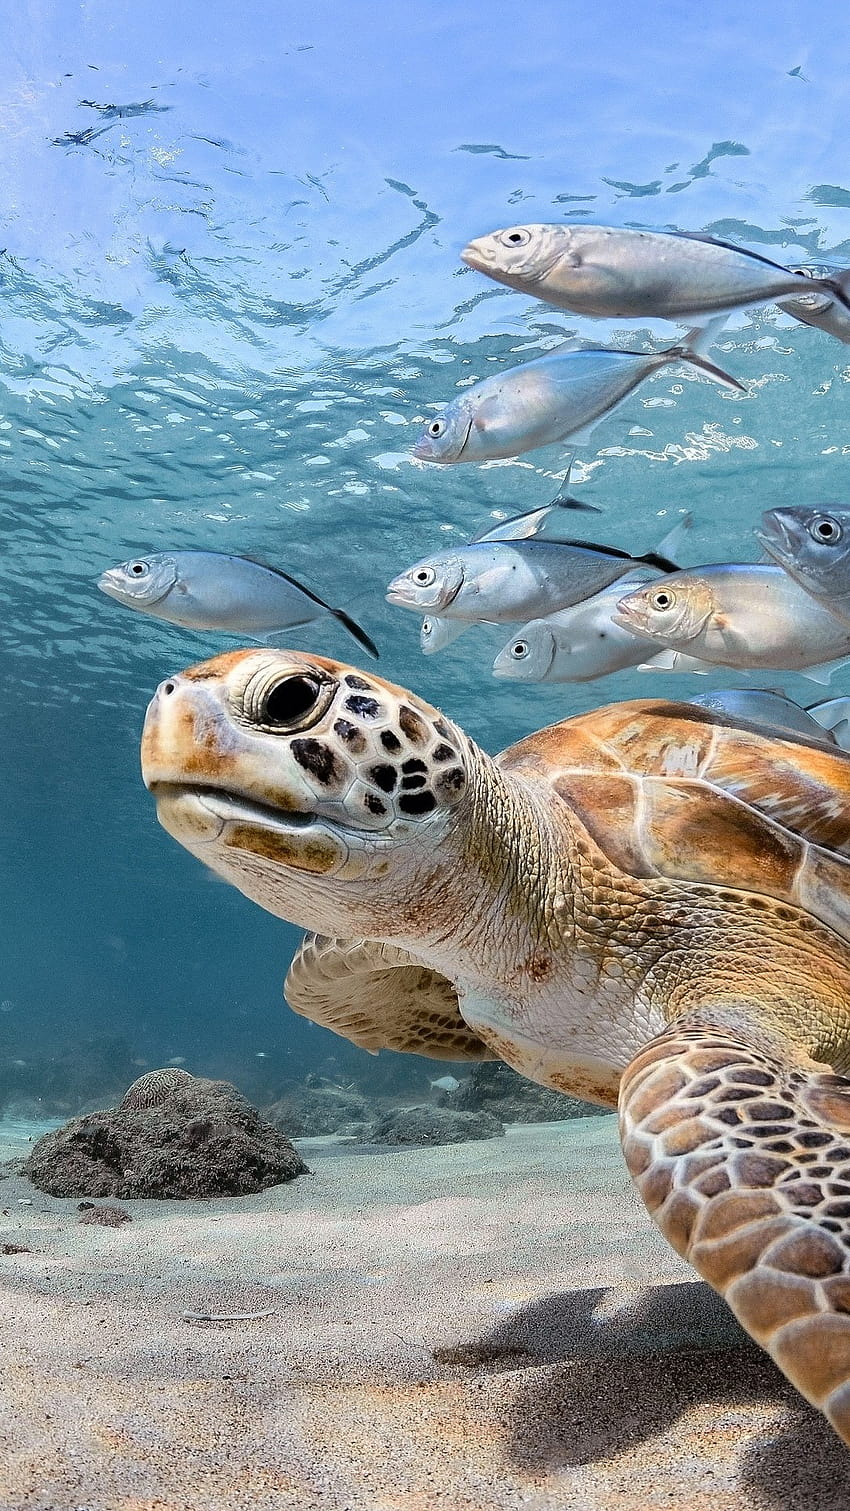 A turtle swimming in the ocean with fish around it - Sea turtle, fish, turtle, underwater